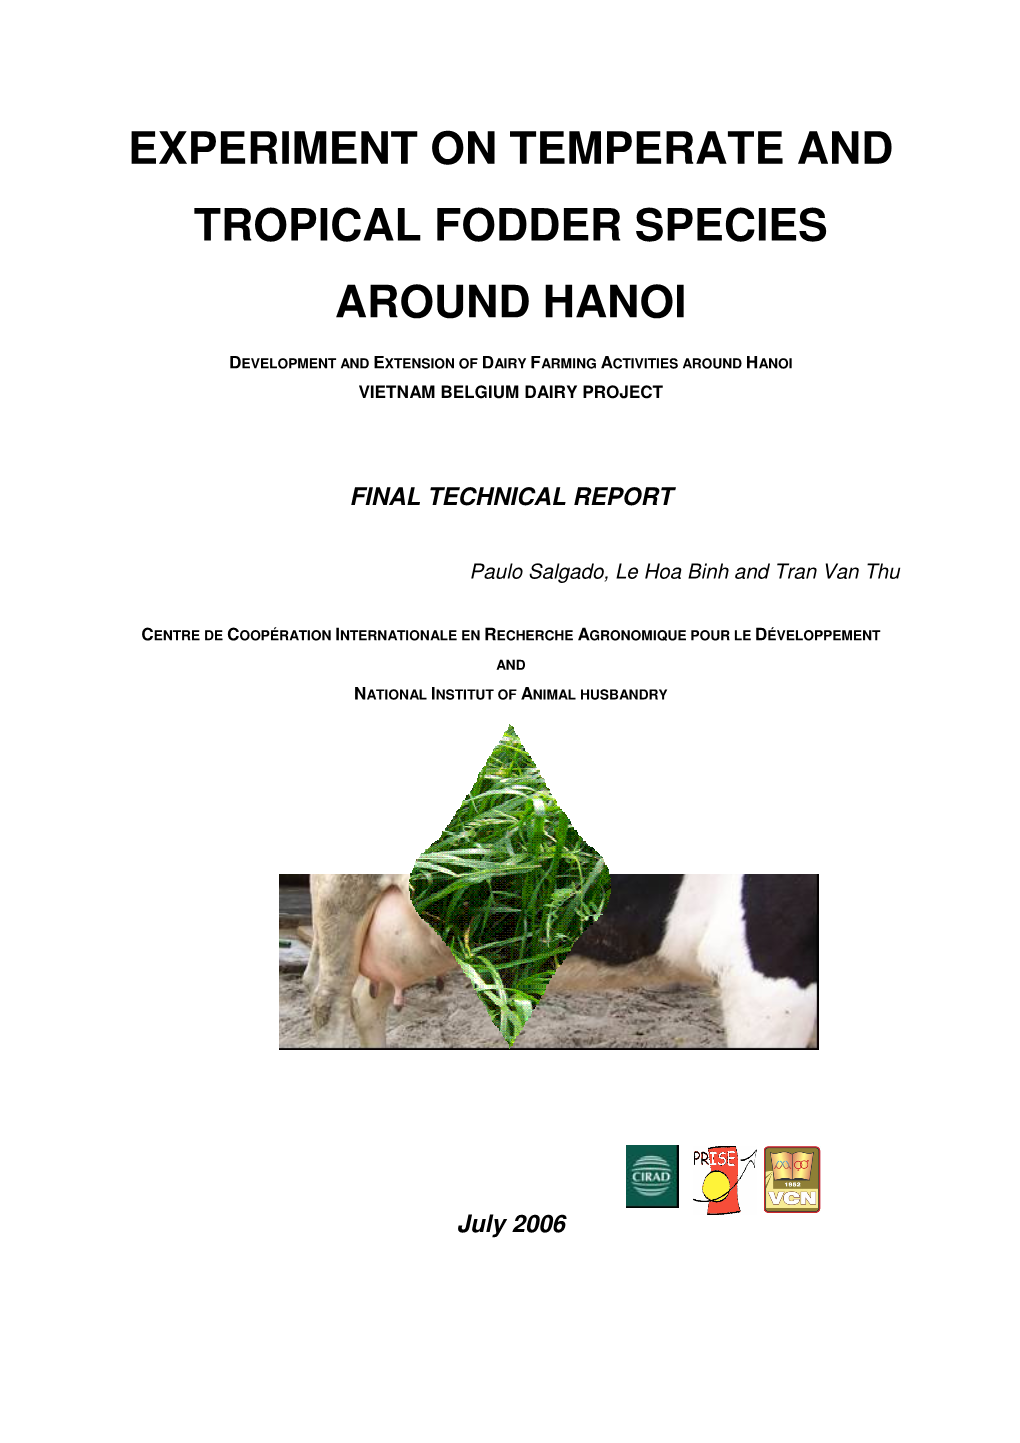 Experiment on Temperate and Tropical Fodder Species Around Hanoi